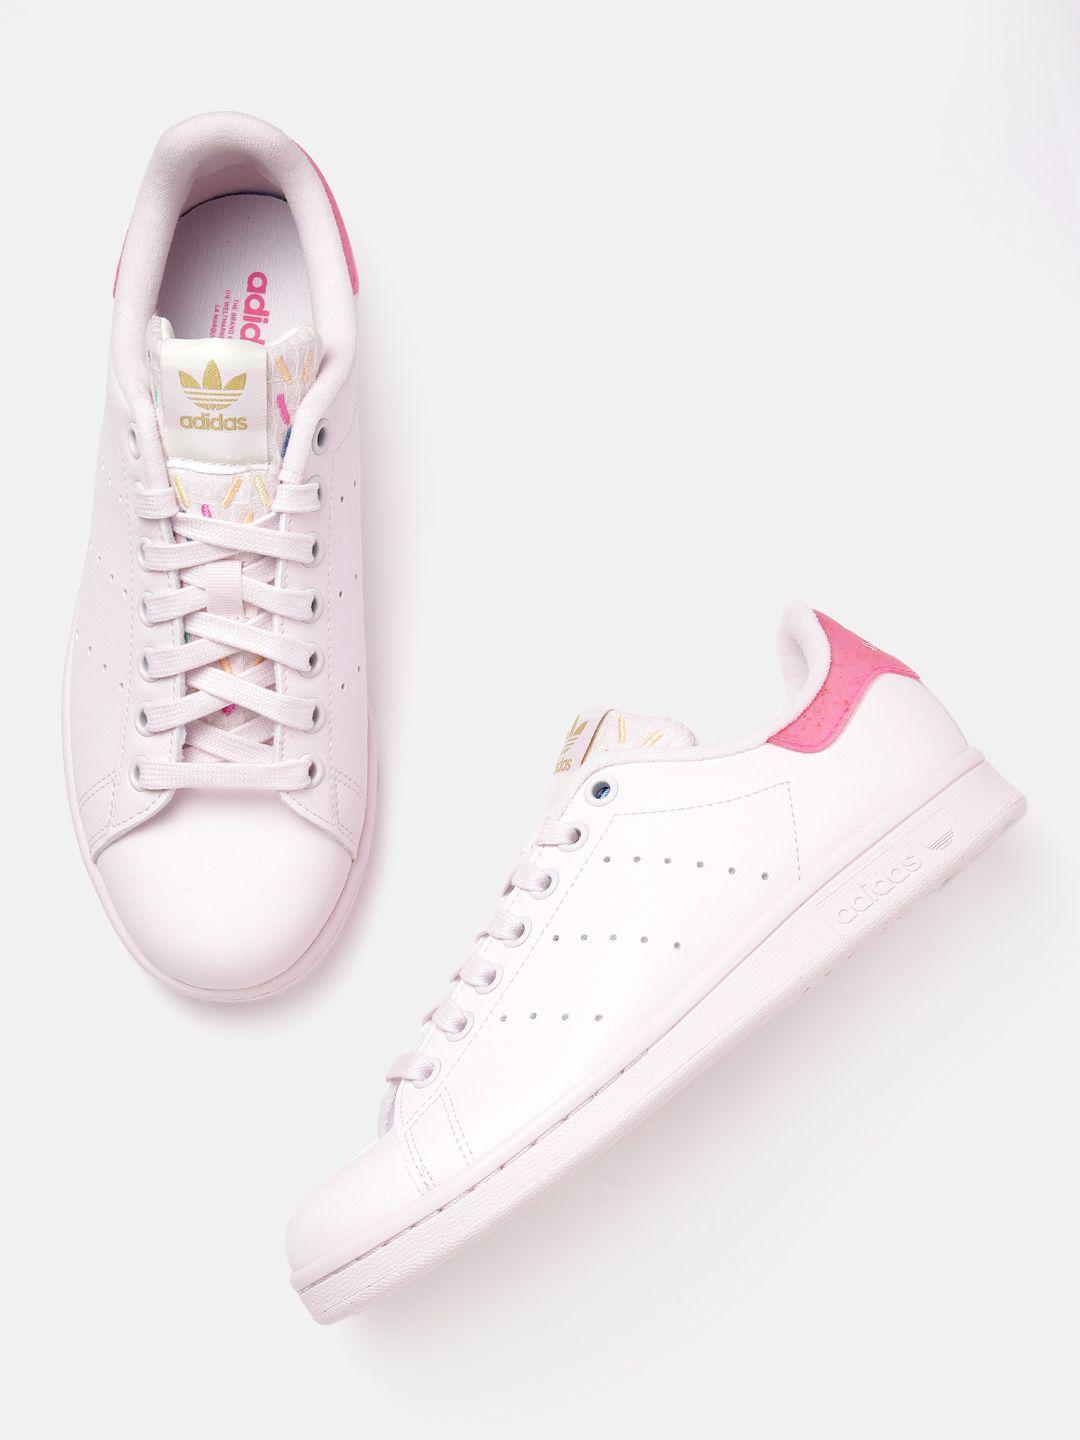 adidas originals women leather perforated stan smith her vegan sneakers